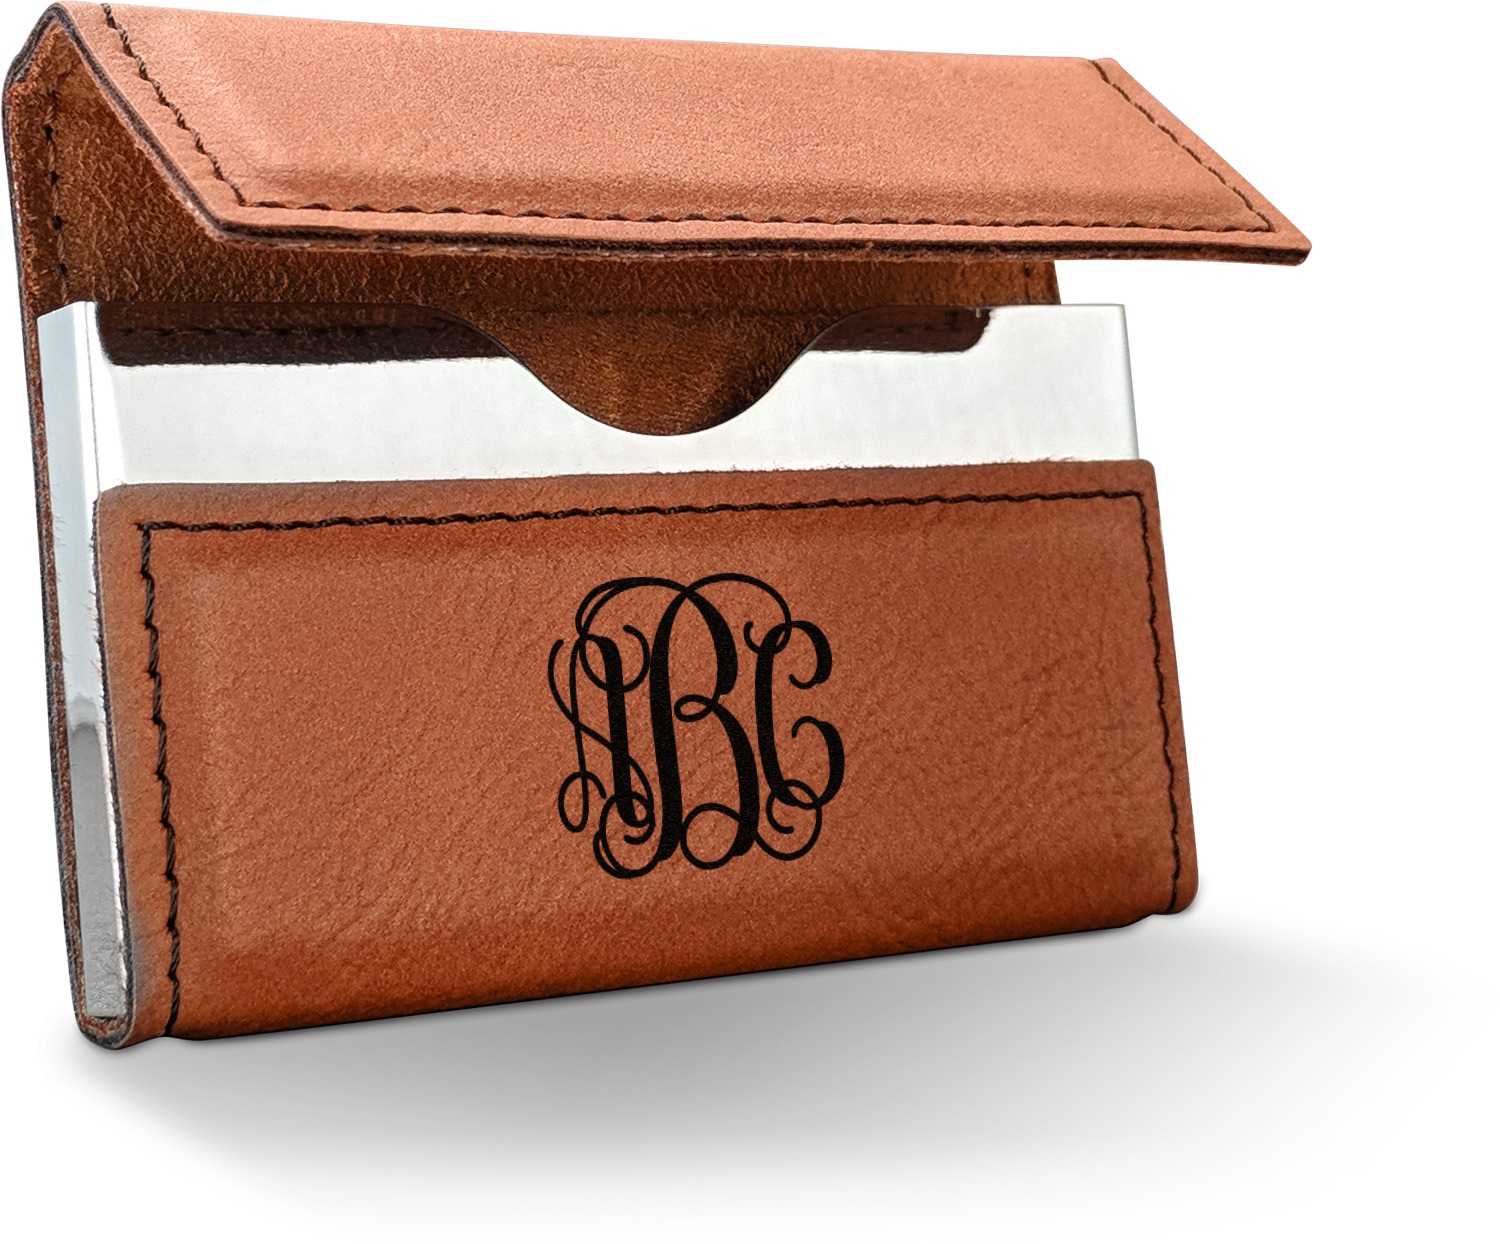 Personalized Business Card Holders For Women